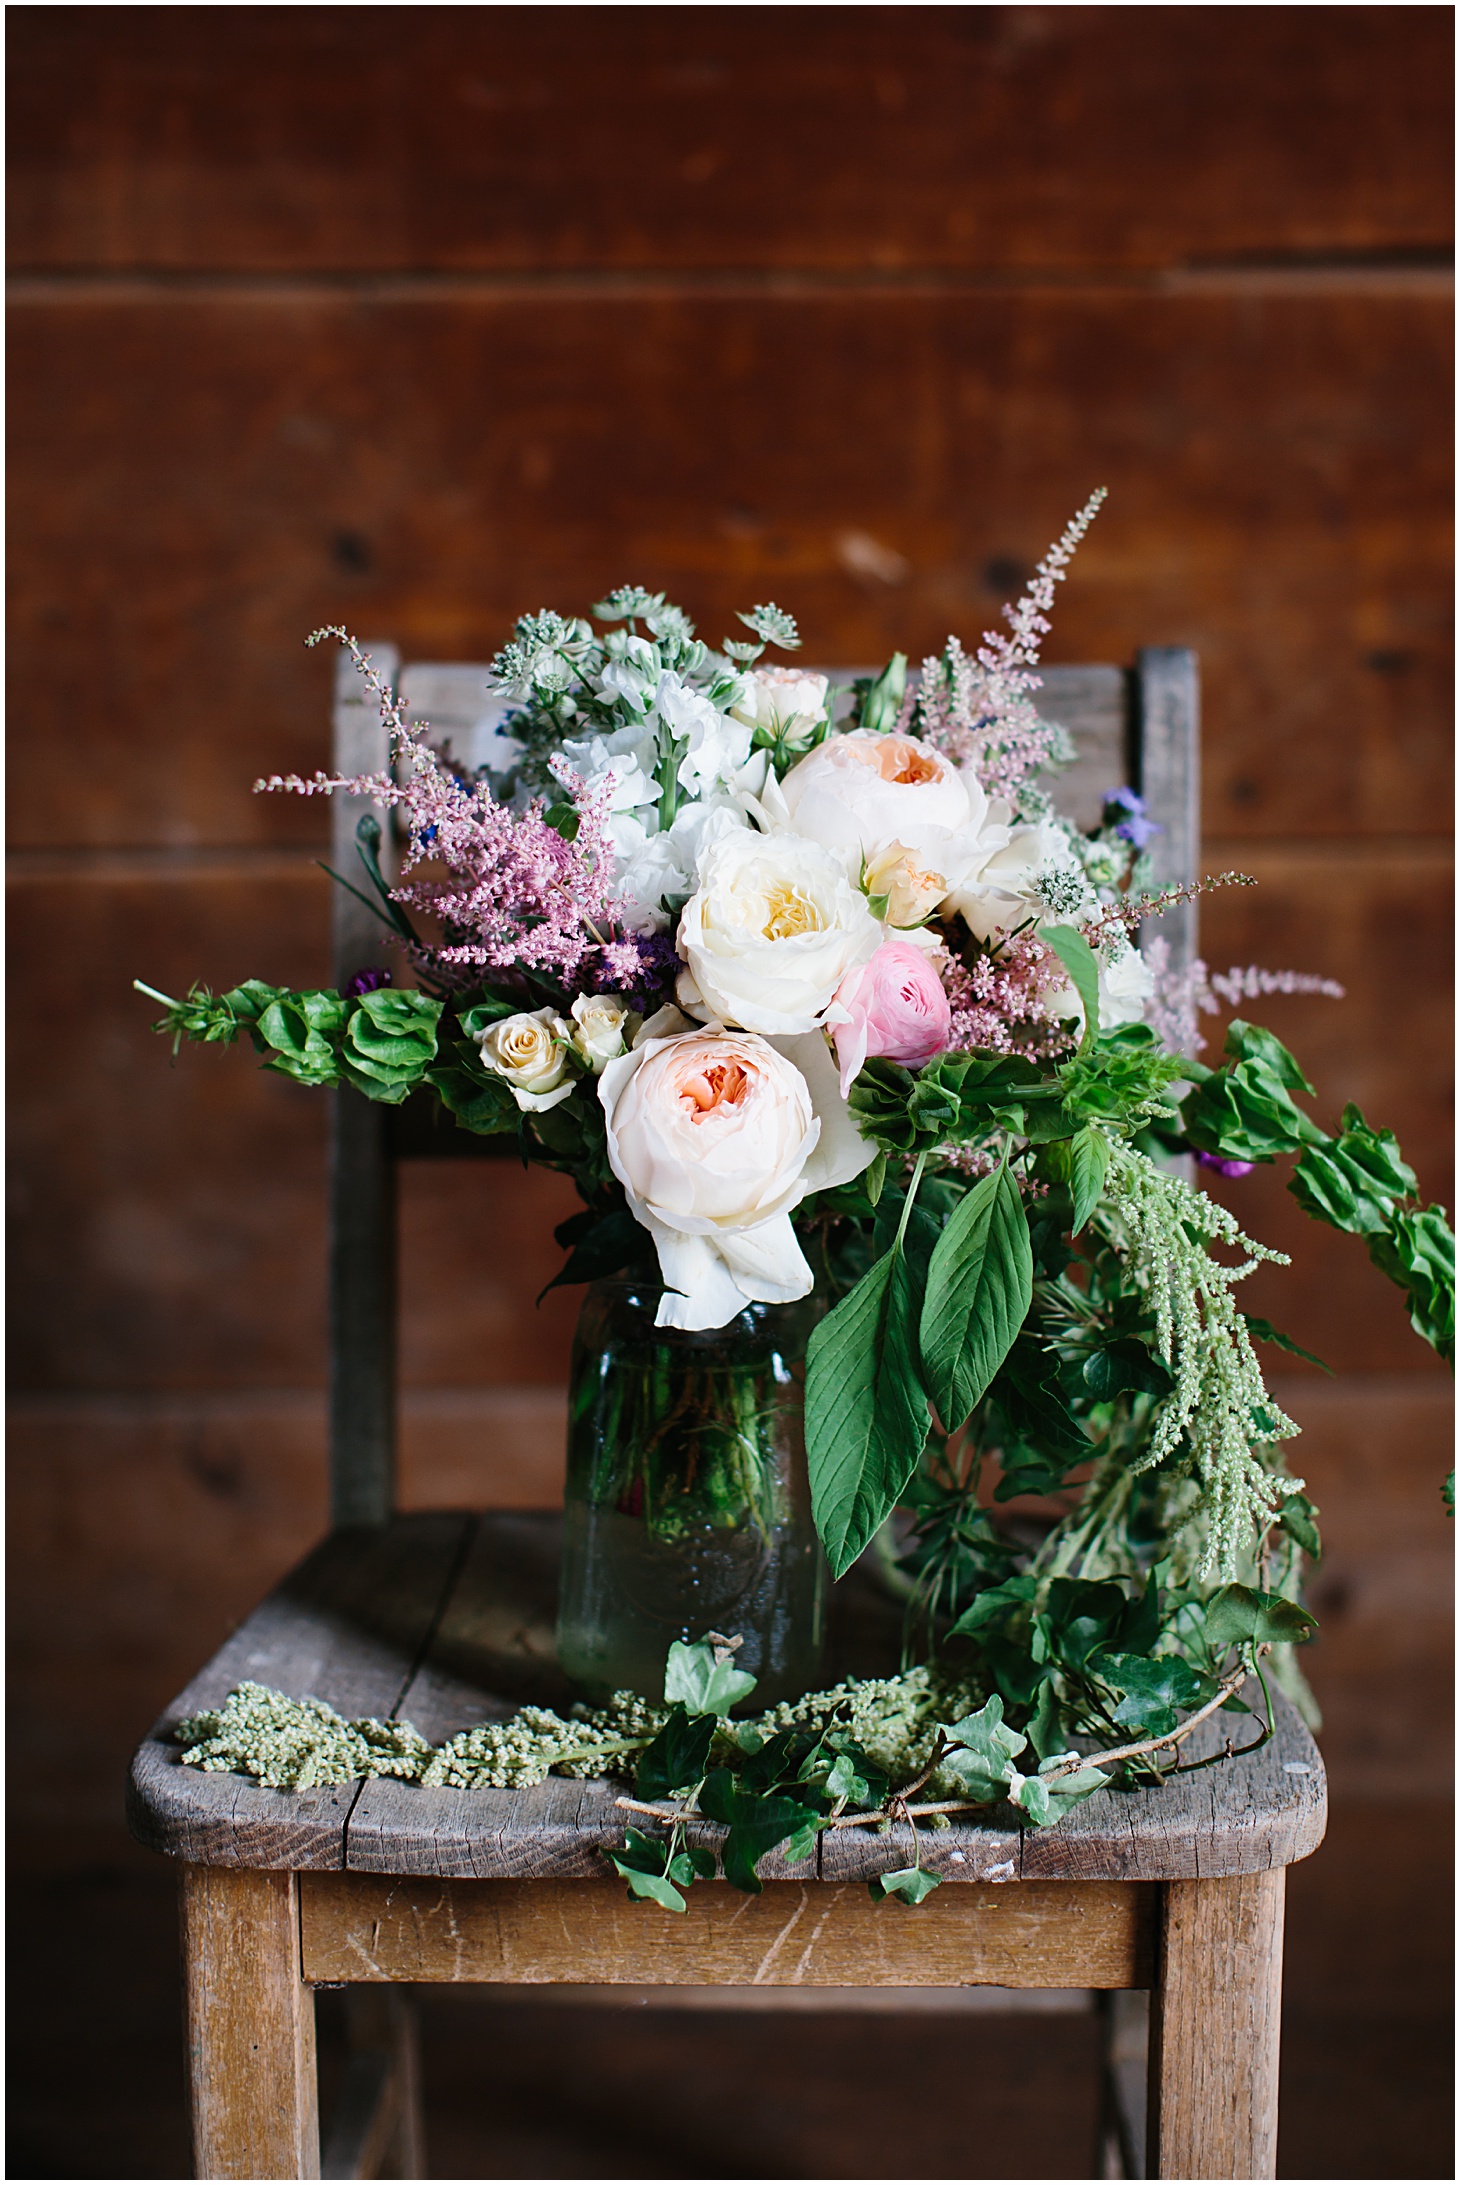 Rustic Floral Wedding at Rocklands Farm & Winery by Sarah Bradshaw Photography_0002